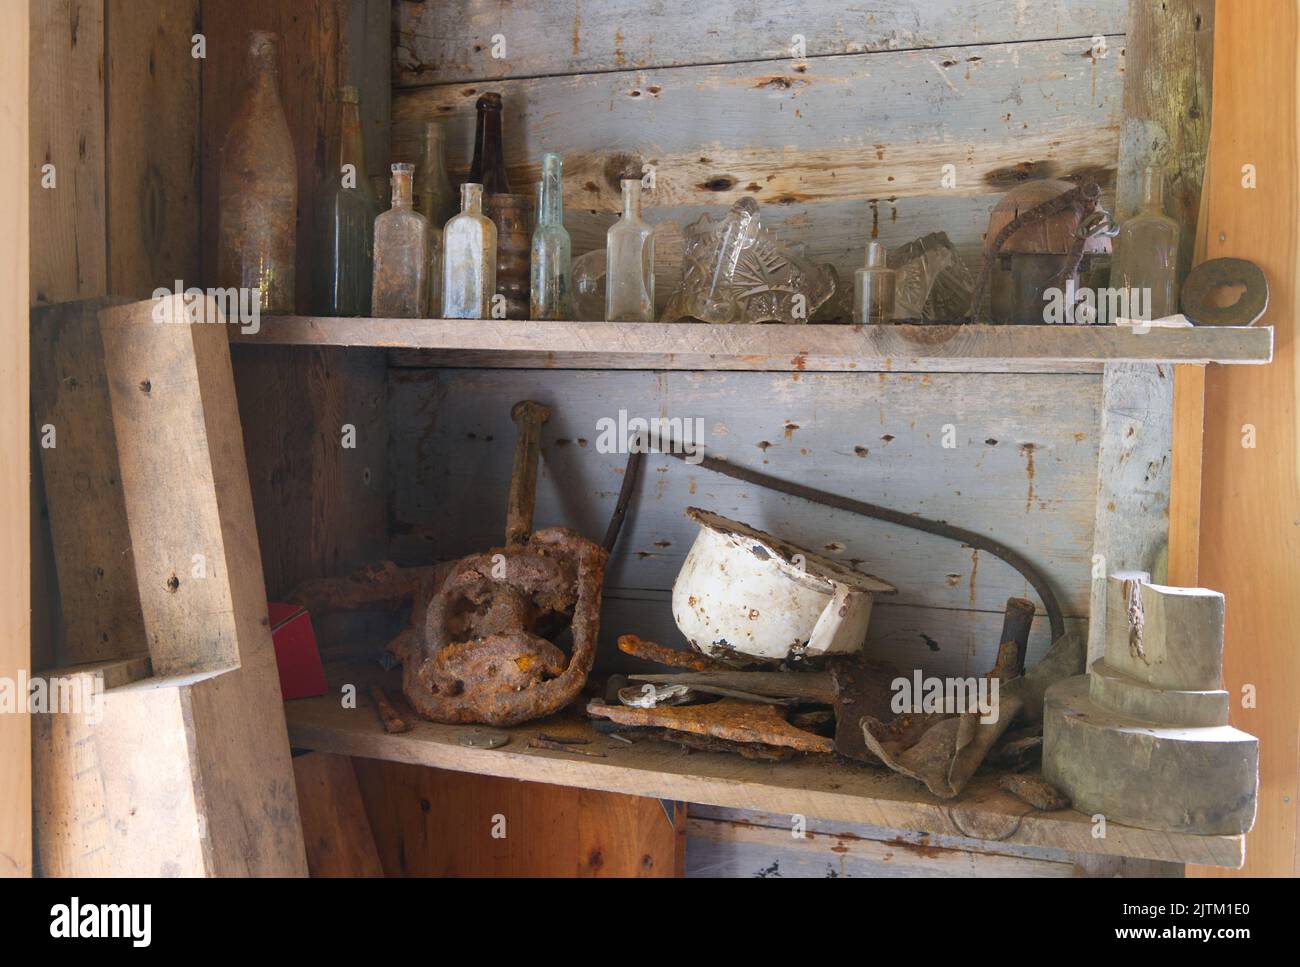 Items on a shelf in the historic Brewster Grist Mill on Cape Cod Stock Photo